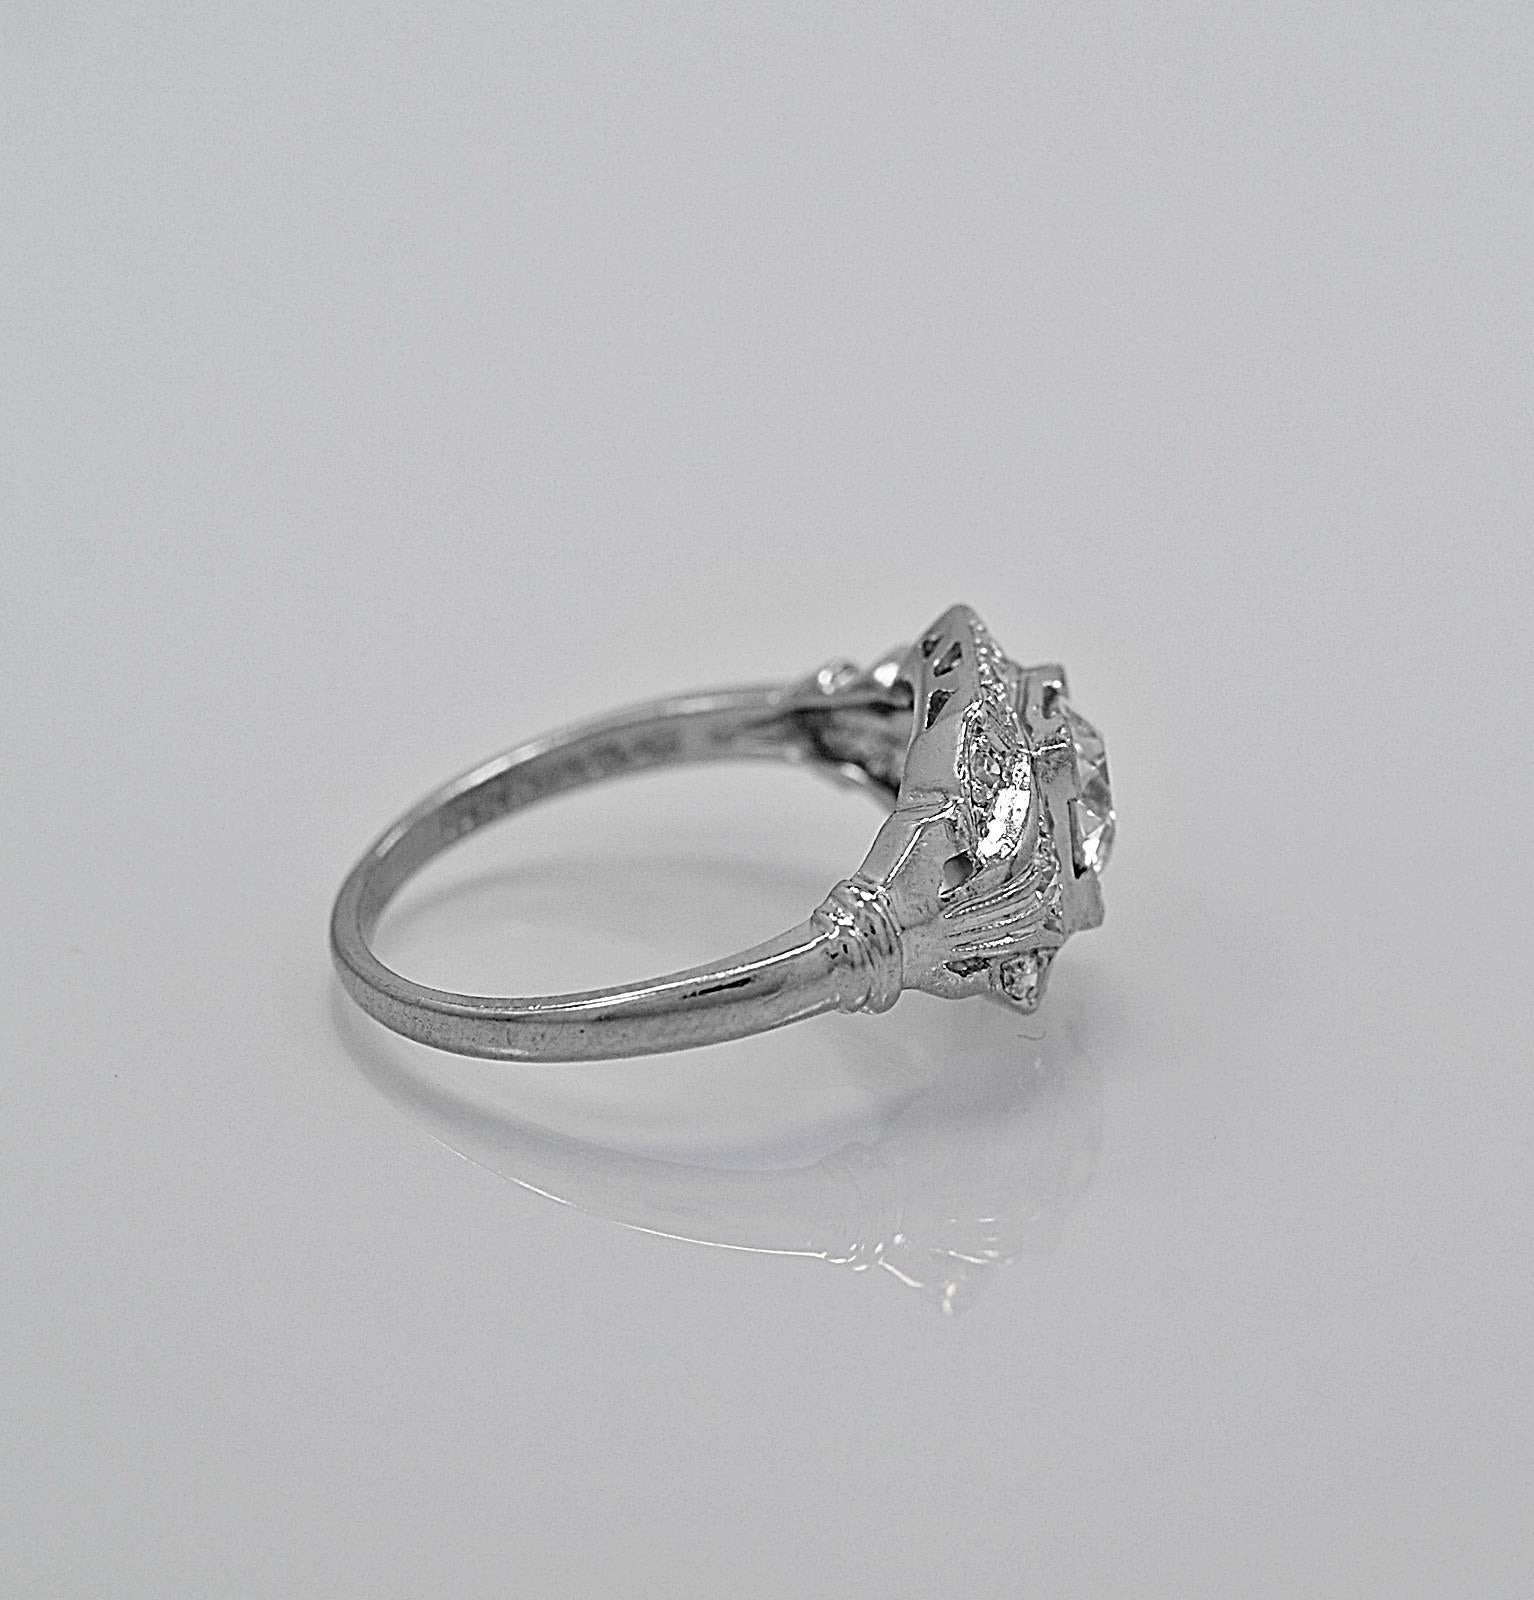 A superior quality antique engagement ring crafted in platinum featuring a .70ct. apx. European cut diamond of VS1 clarity and K-L color. The accenting .25ct. apx. T.W. of diamond melee highlights the center diamond beautifully. This is an overall